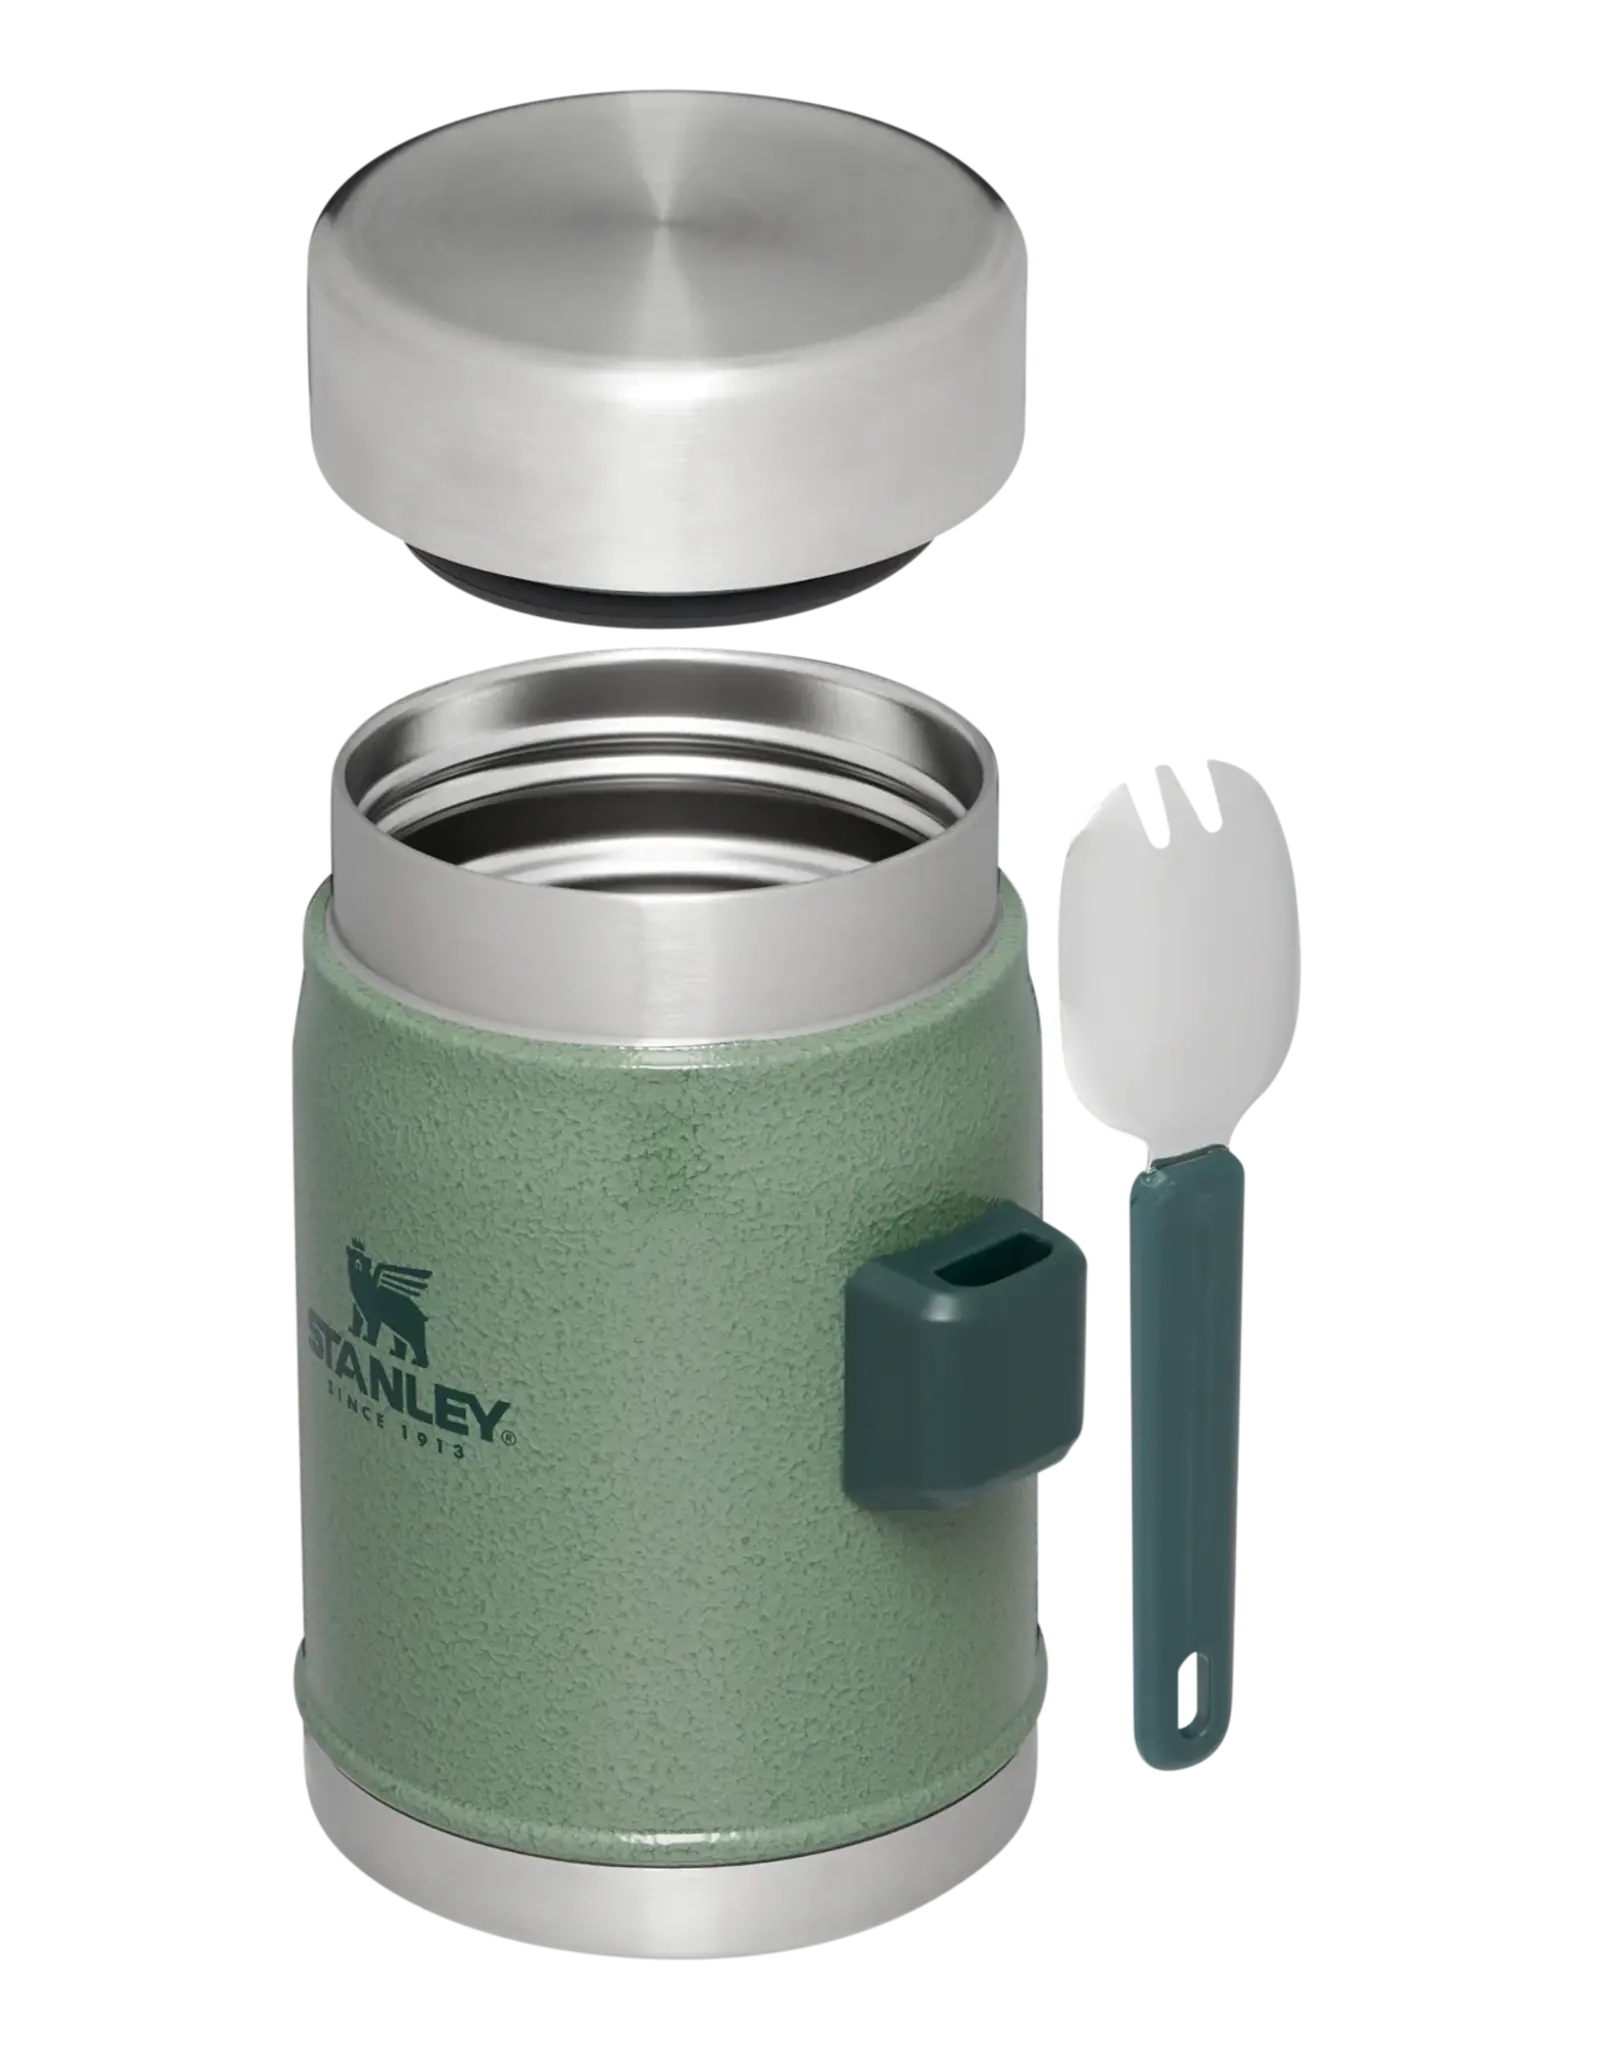 STANLEY THE LEGENDARY CLASSIC FOOD JAR 14OZ/0.4L - HAMMERED GREEN